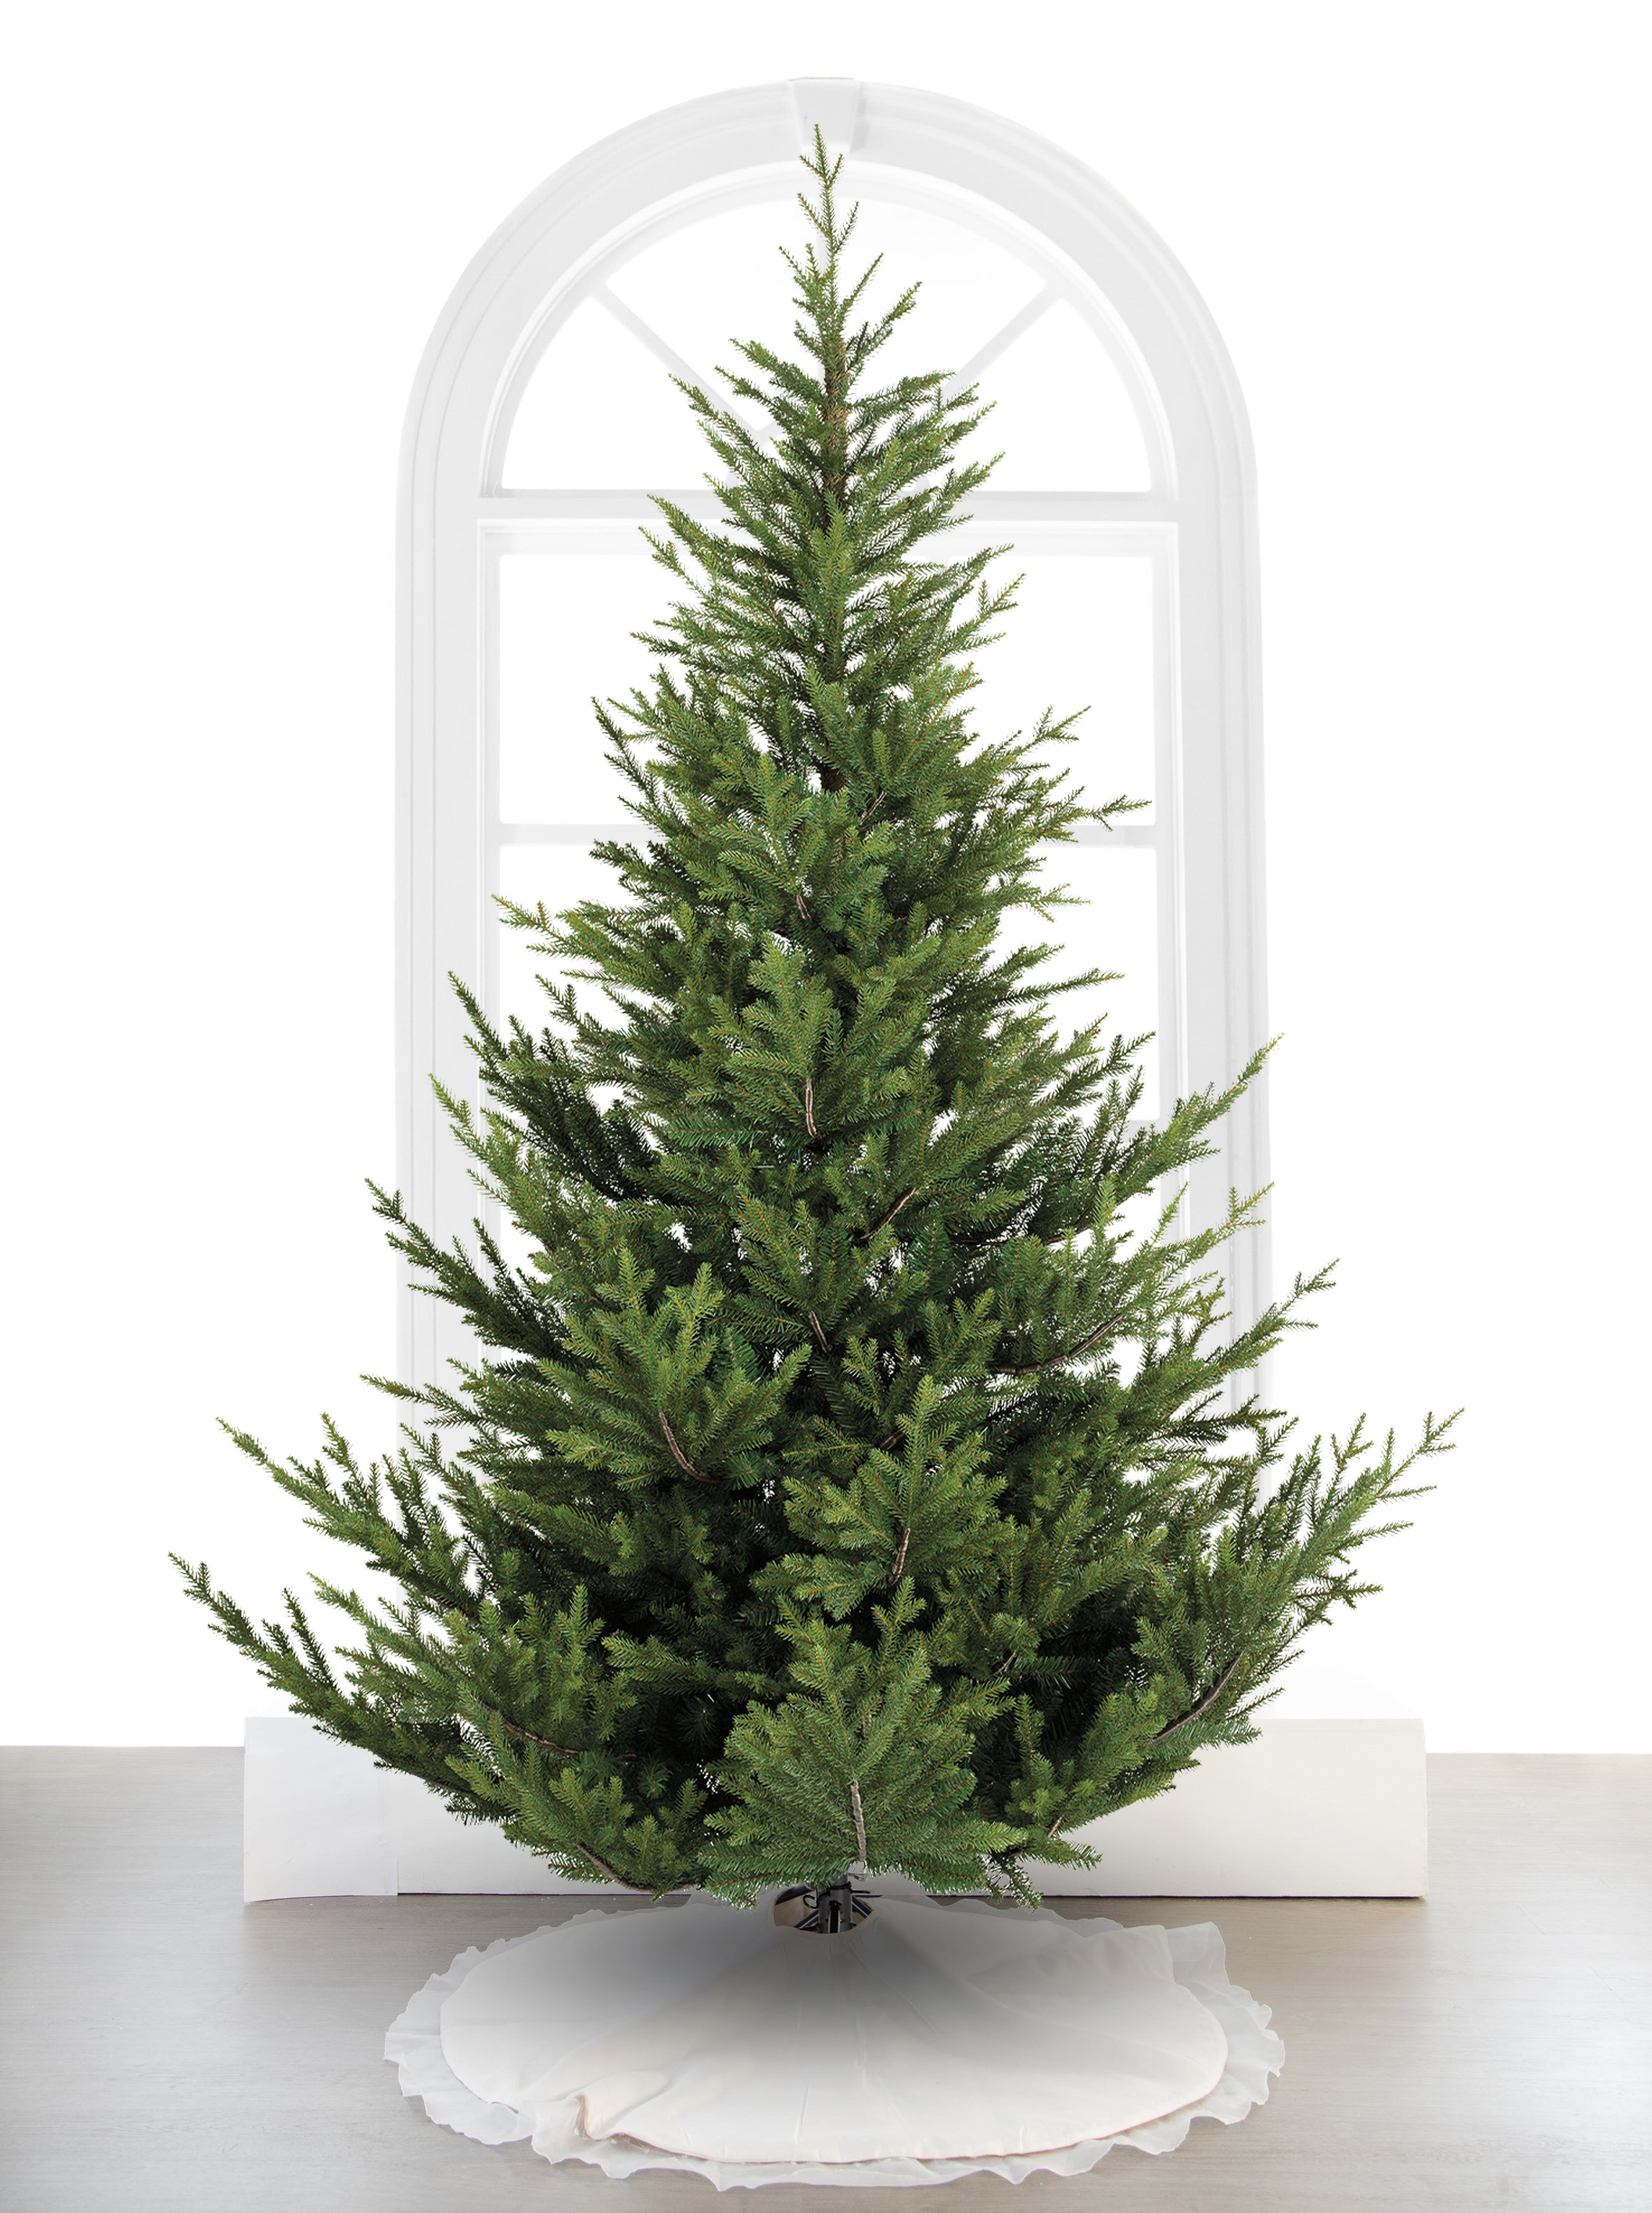 Image of 7 FT NORWAY SPRUCE TREE PRE LIT WARM WHITE LED LIGHTS